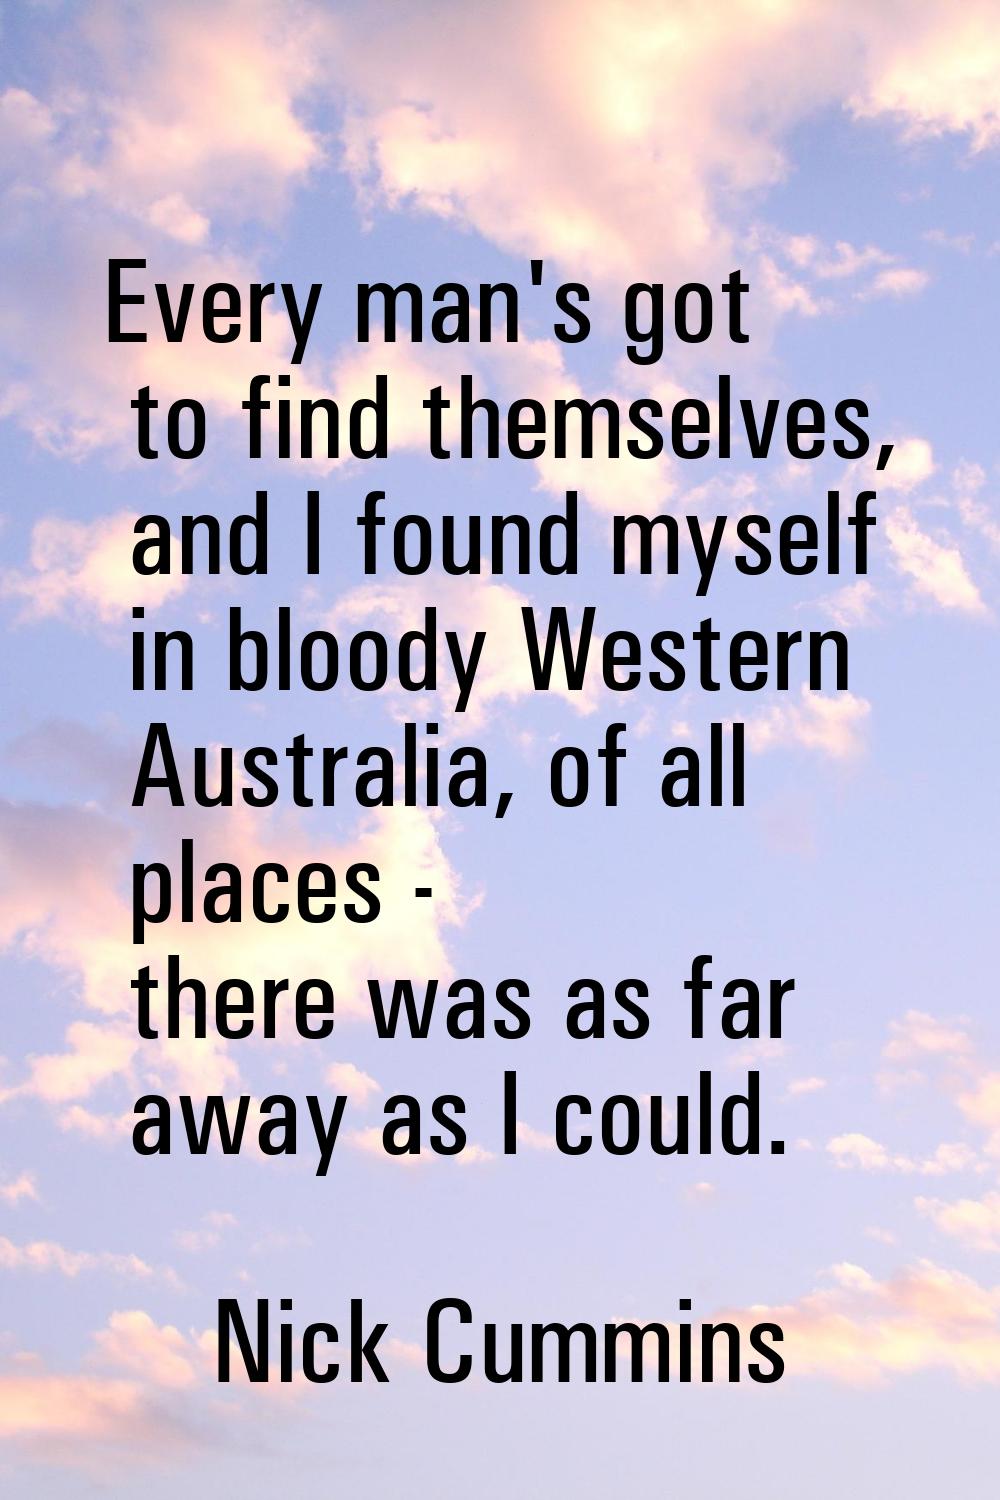 Every man's got to find themselves, and I found myself in bloody Western Australia, of all places -